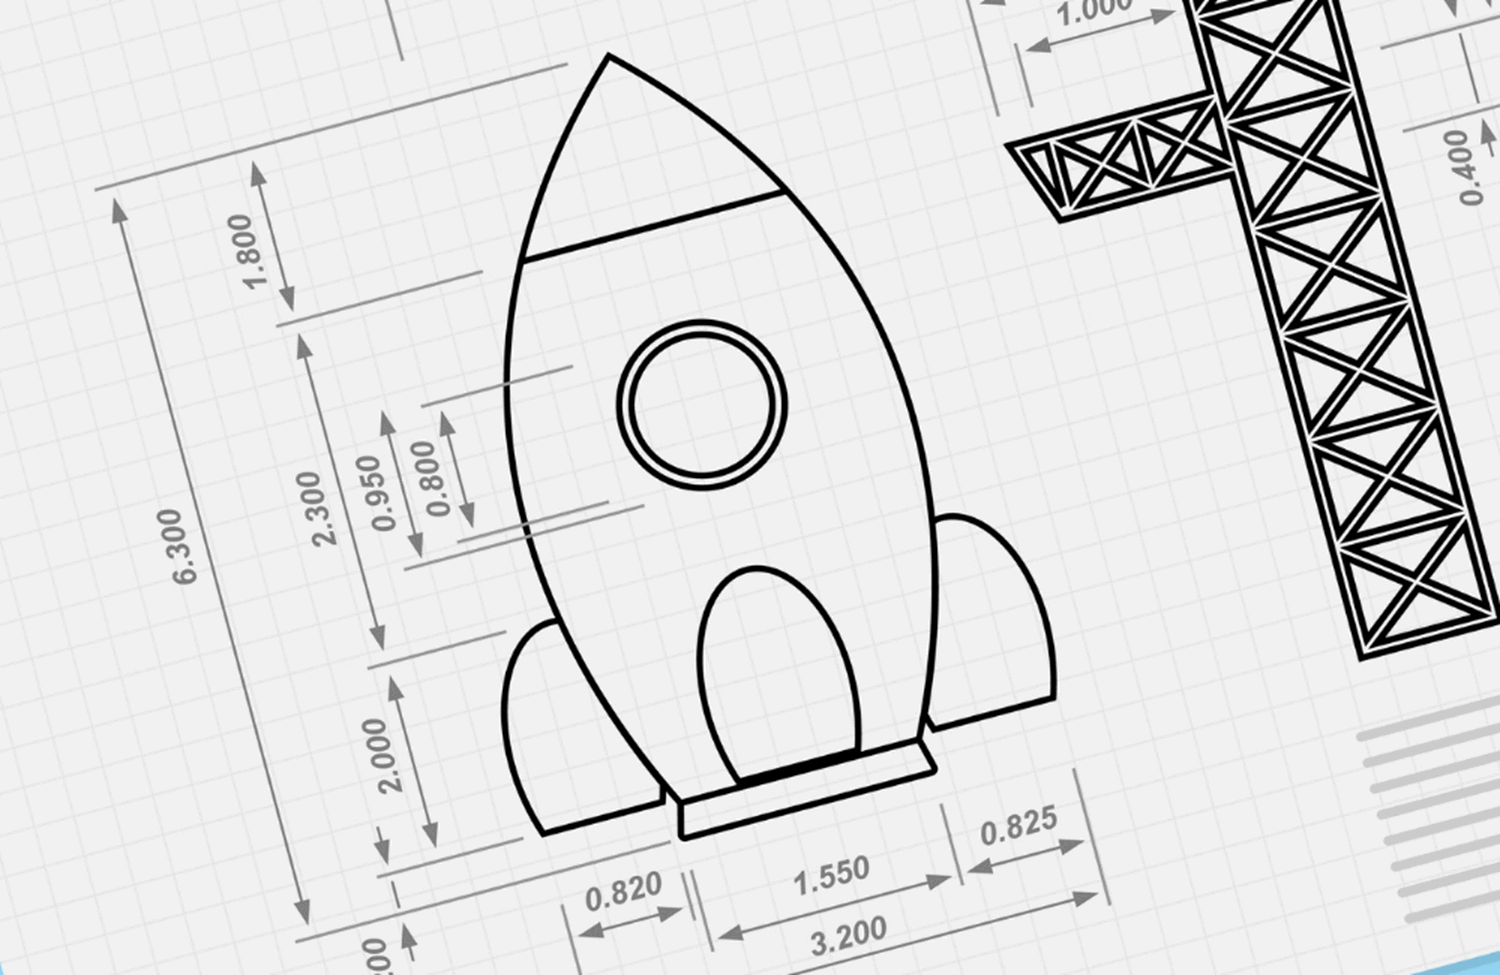 Drawing of a rocket